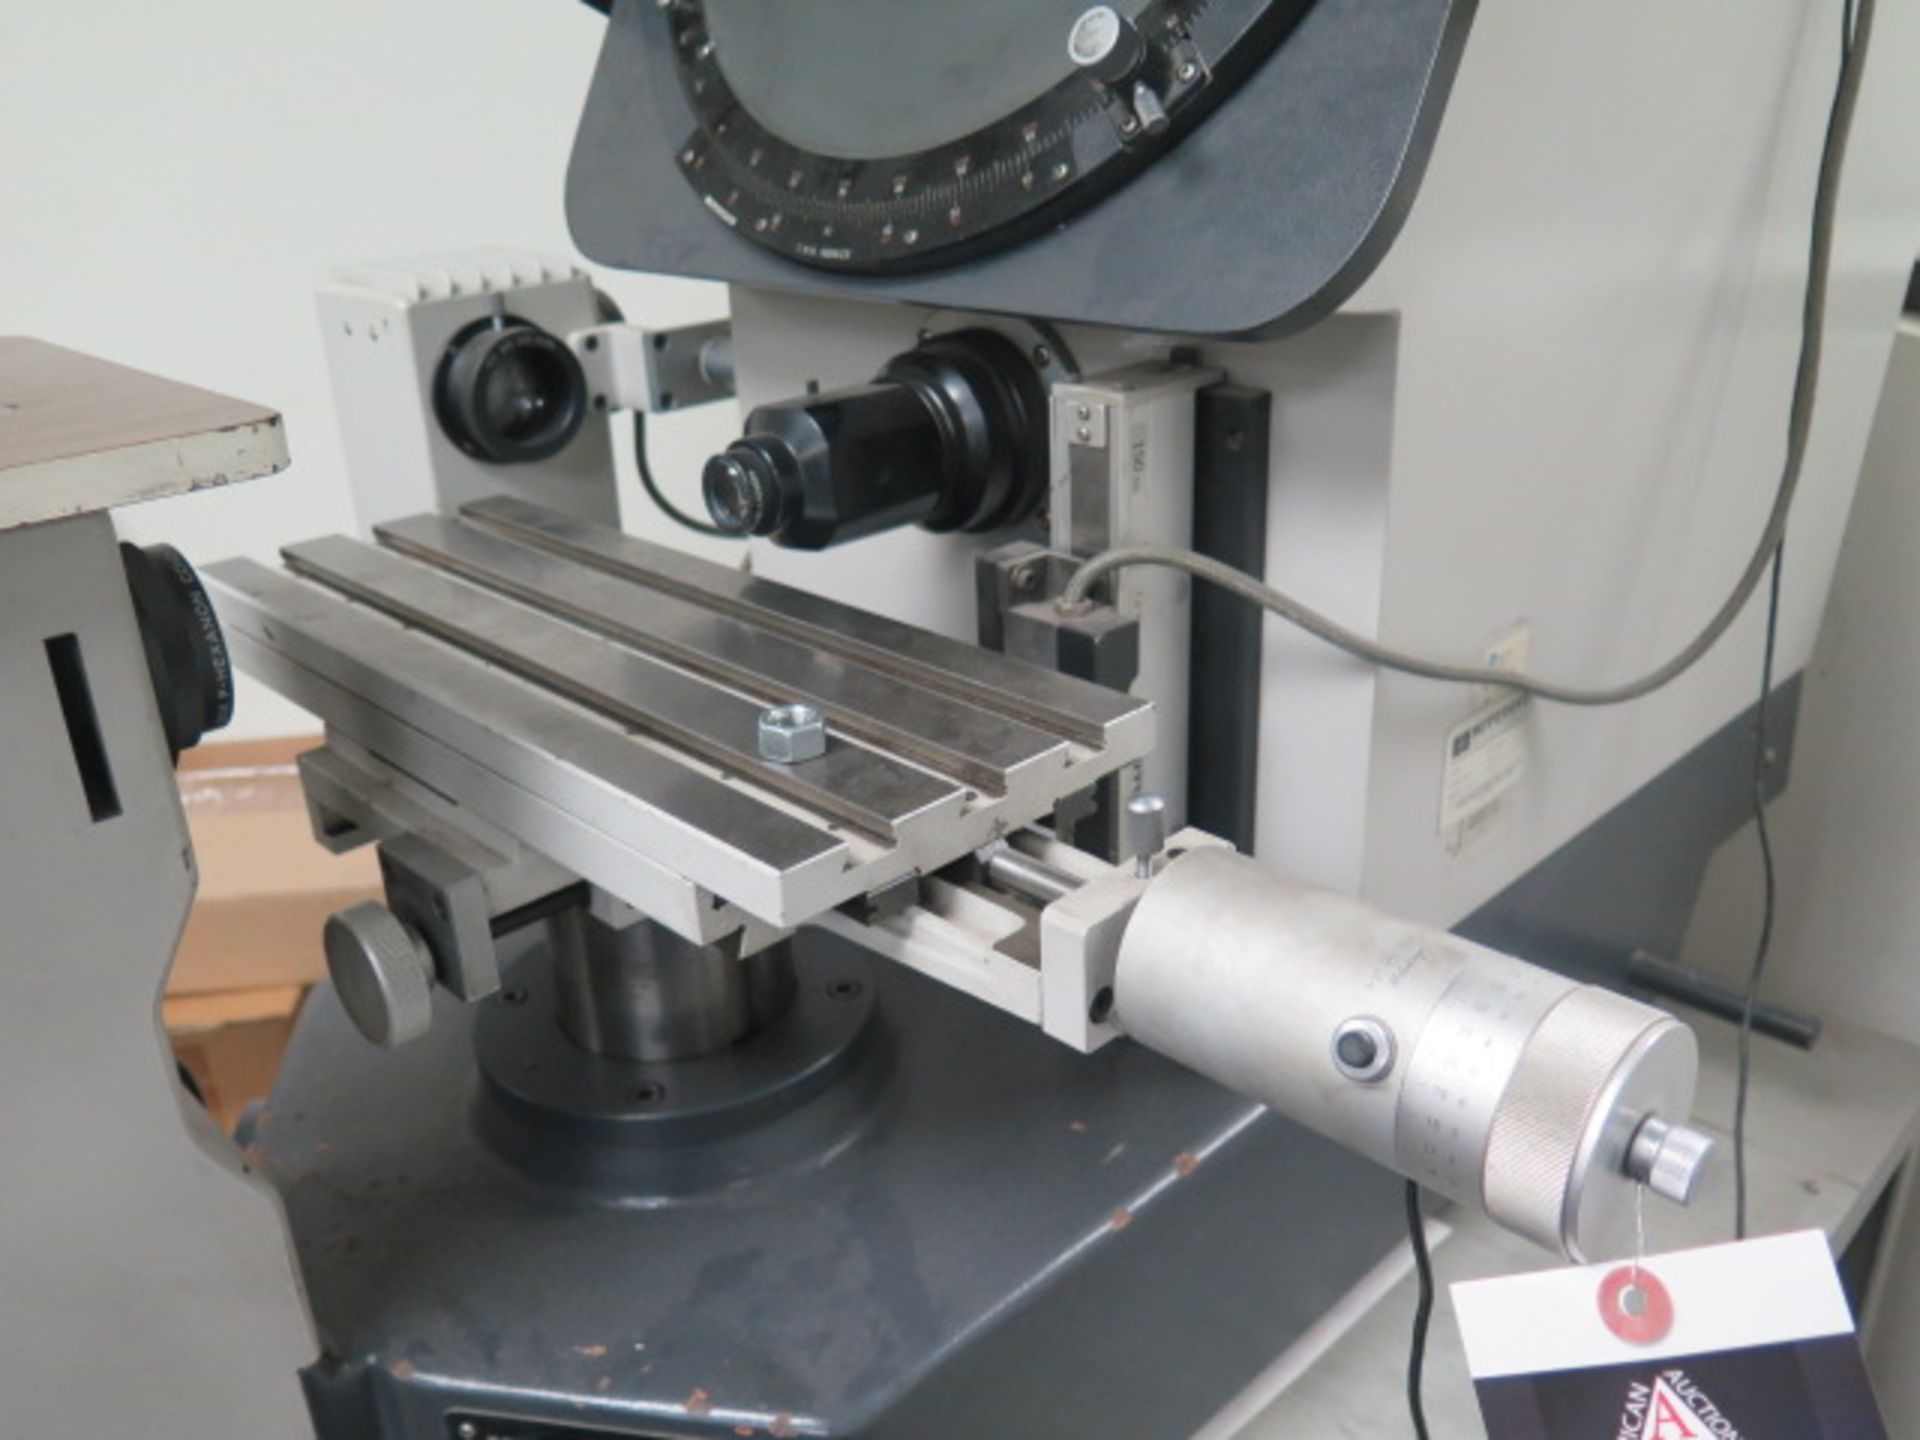 Mitutoyo PH-350 13" Optical Comparator s/n 362 w/ Mitutoyo DRO's, 20X and 50X Lenses, SOLD AS IS - Image 6 of 12